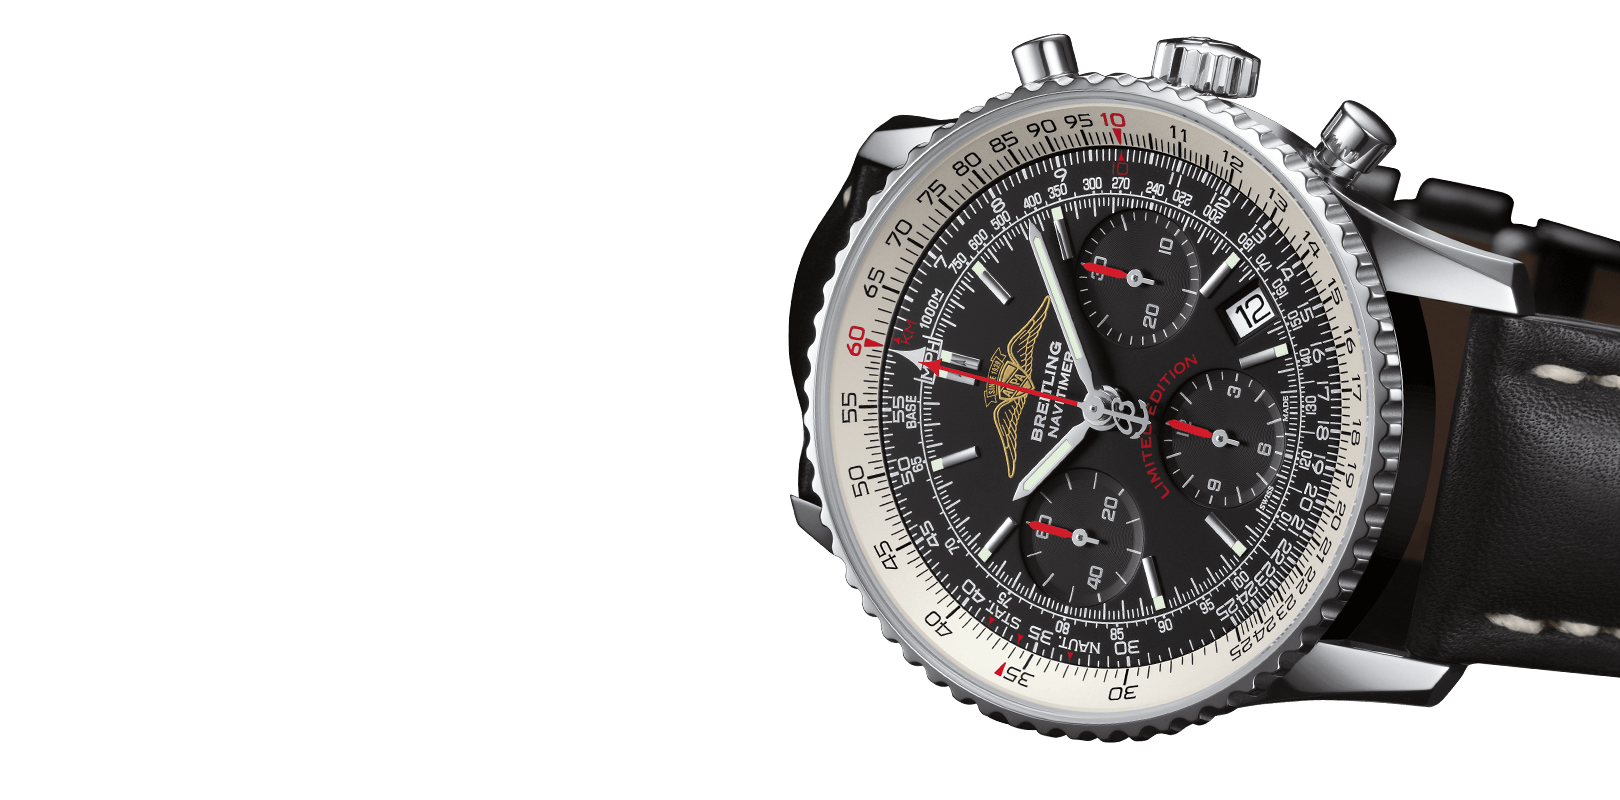 The breitling | timed across the ocean, beginning in the 1970s